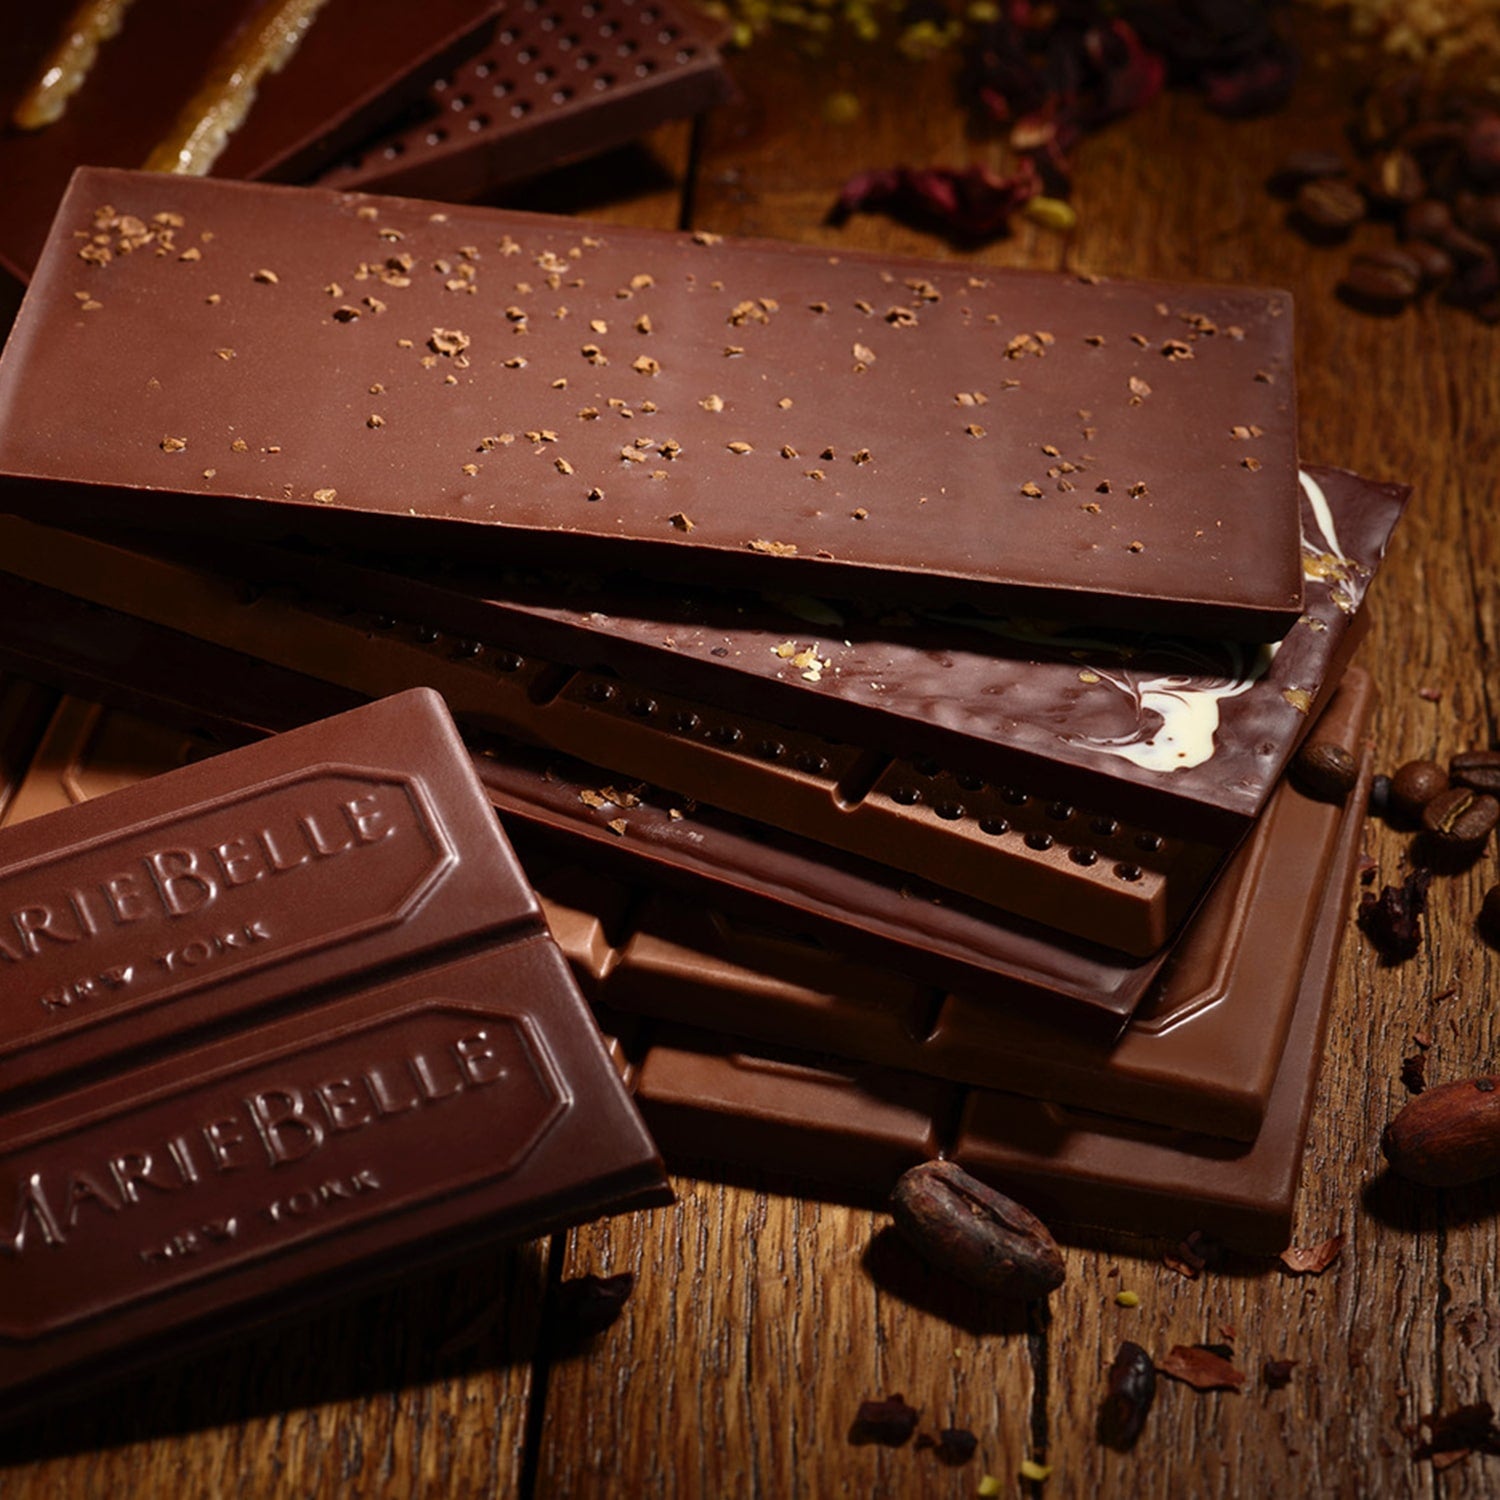 Collection image featuring chocolate bars.